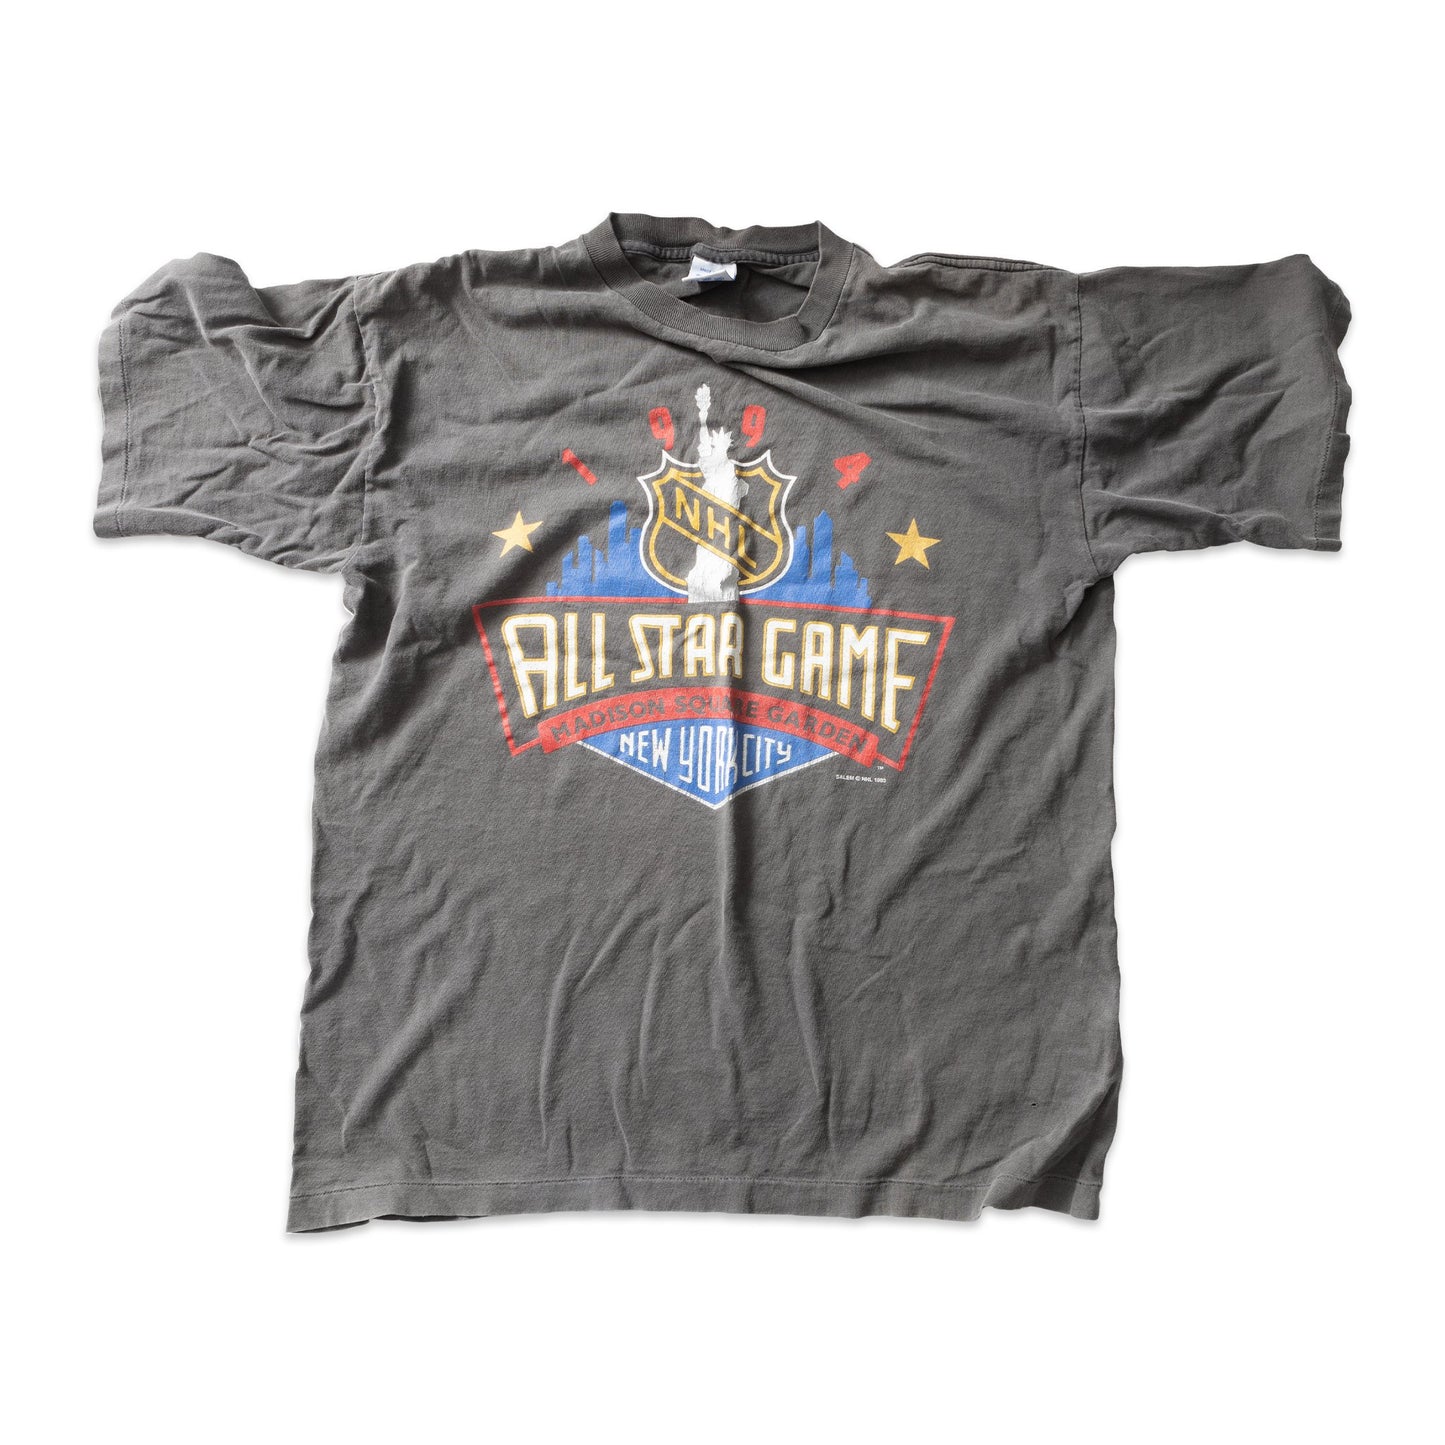 1994 NHL All Star Game NYC Madison Square Garden Tee